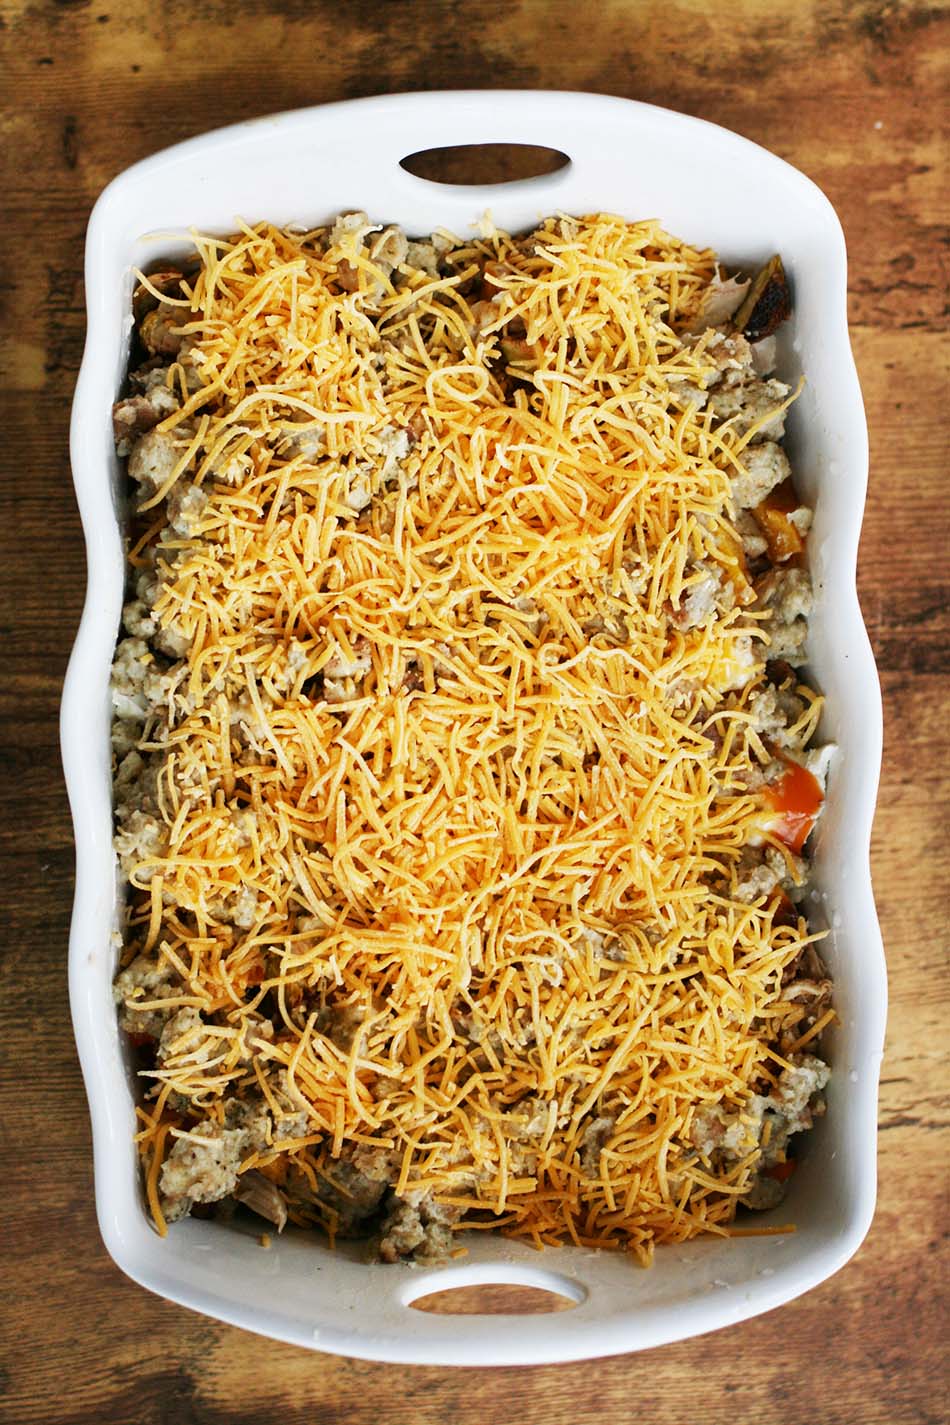 Thanksgiving leftover hotdish: Made with leftover Thanksgiving foods, repurposed into something hearty and delicious.